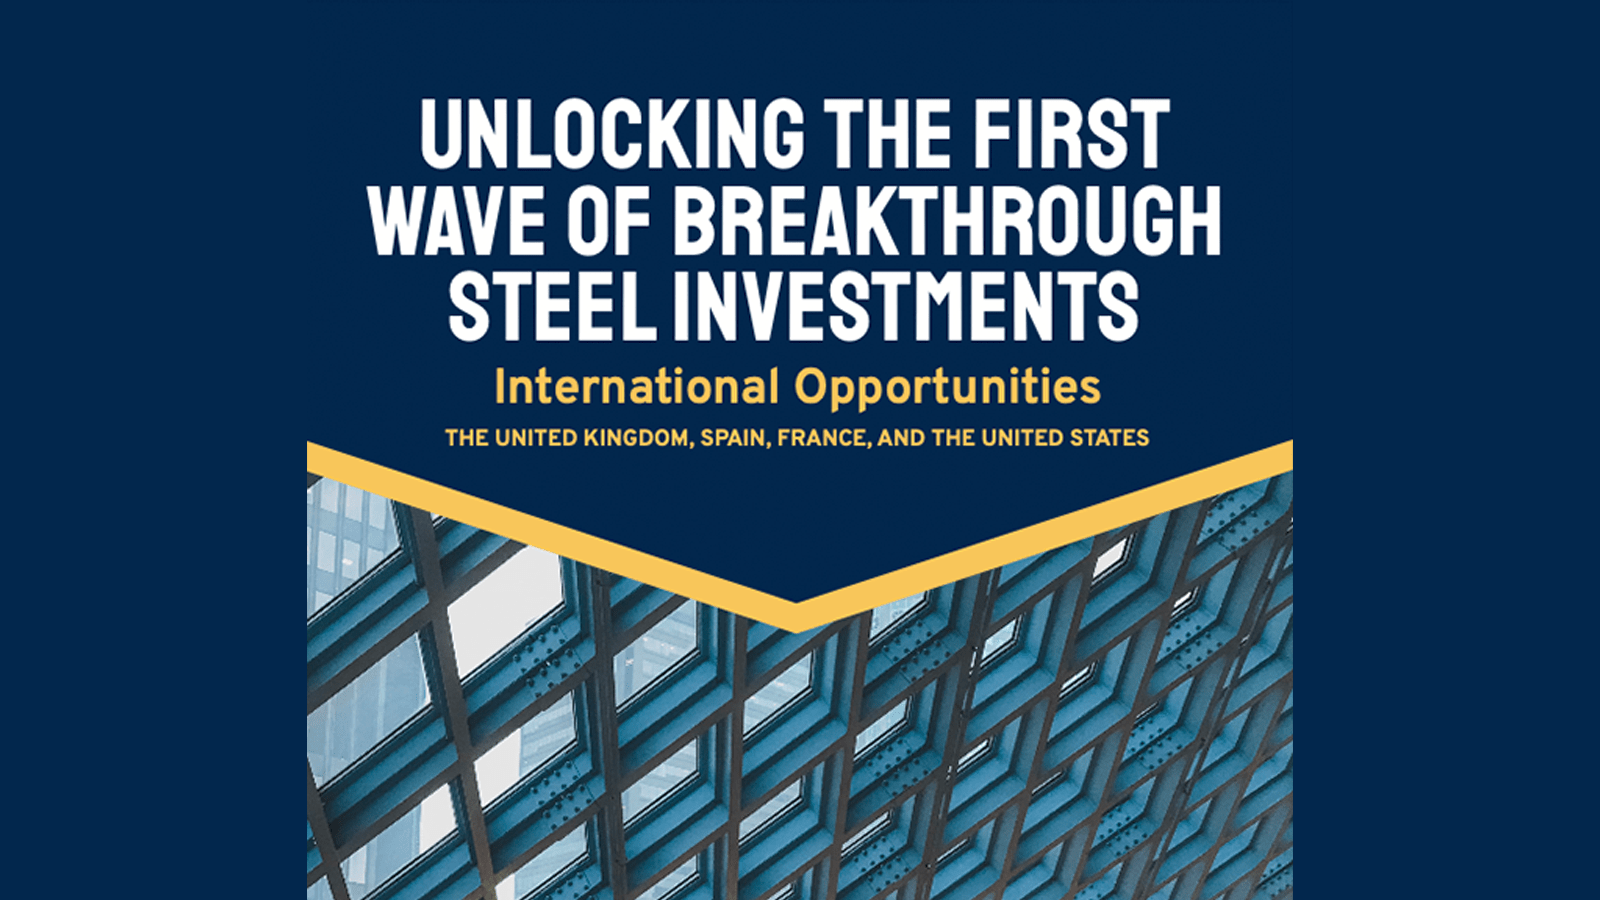 https://www.energy-transitions.org/wp-content/uploads/2023/04/Unlocking-The-First-Wave-of-Breakthrough-Steel-Investments-UK_Social-Card-1-1.png